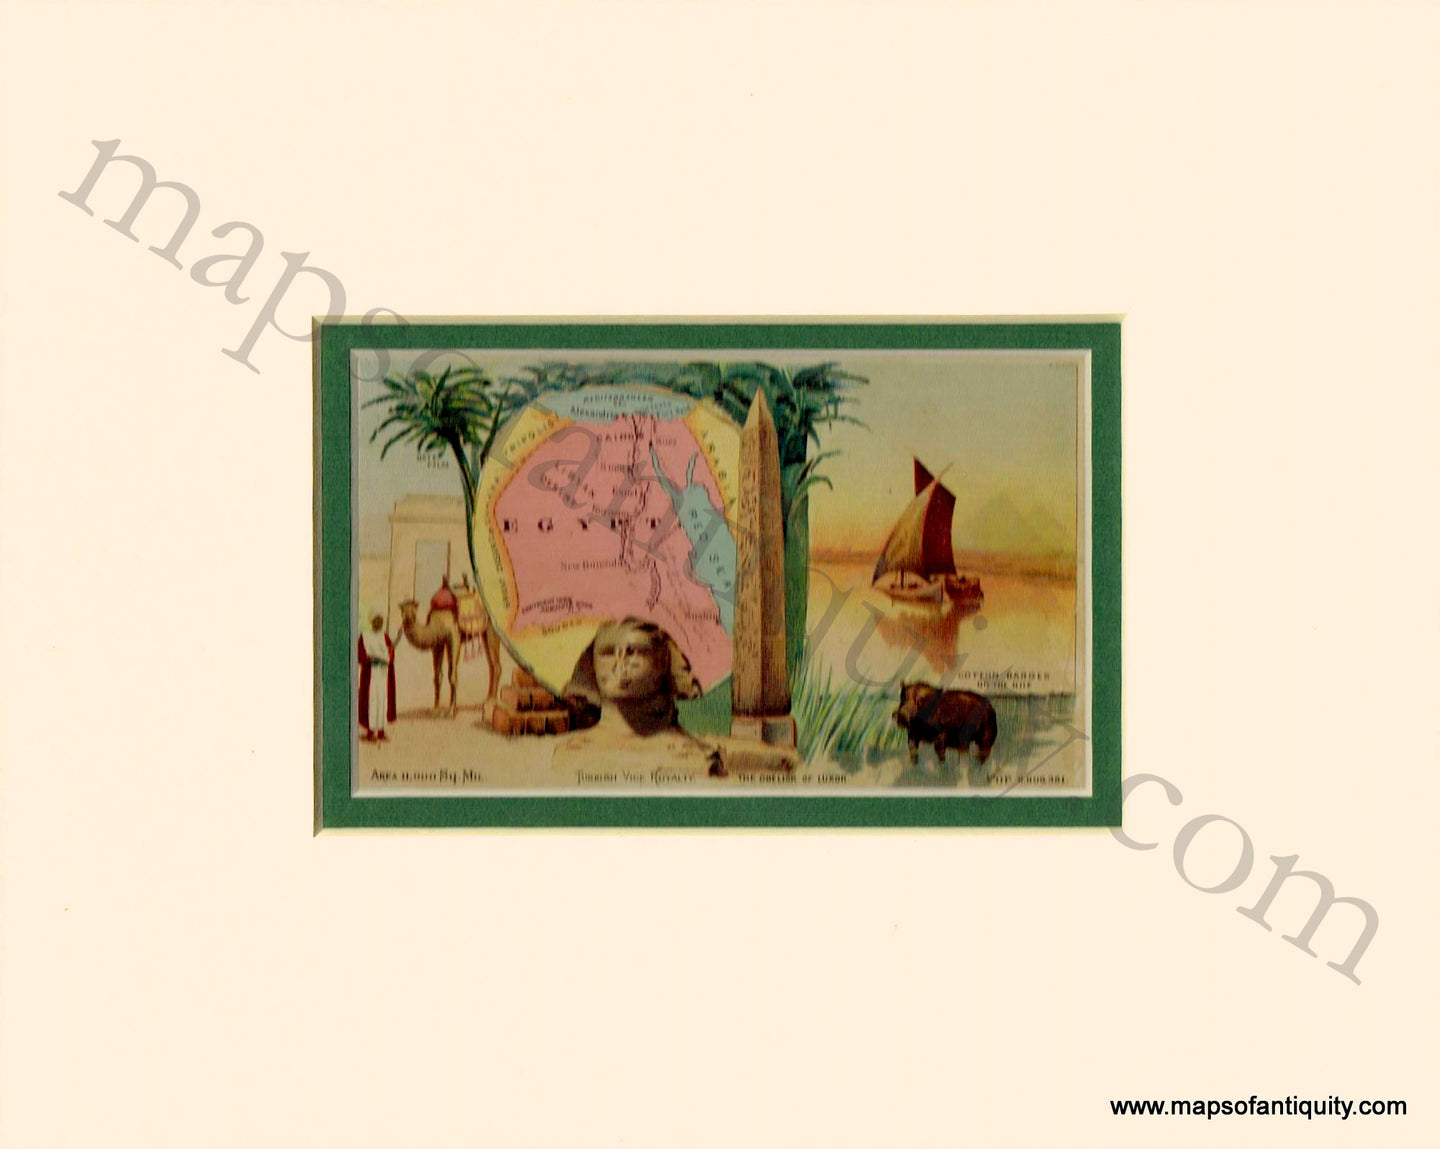 Antique-Map-Chromolithograph-Print-Vignettes-Card-Egypt-Africa-Arbuckle-1890-1890s-1800s-Late-19th-Century-Maps-of-Antiquity